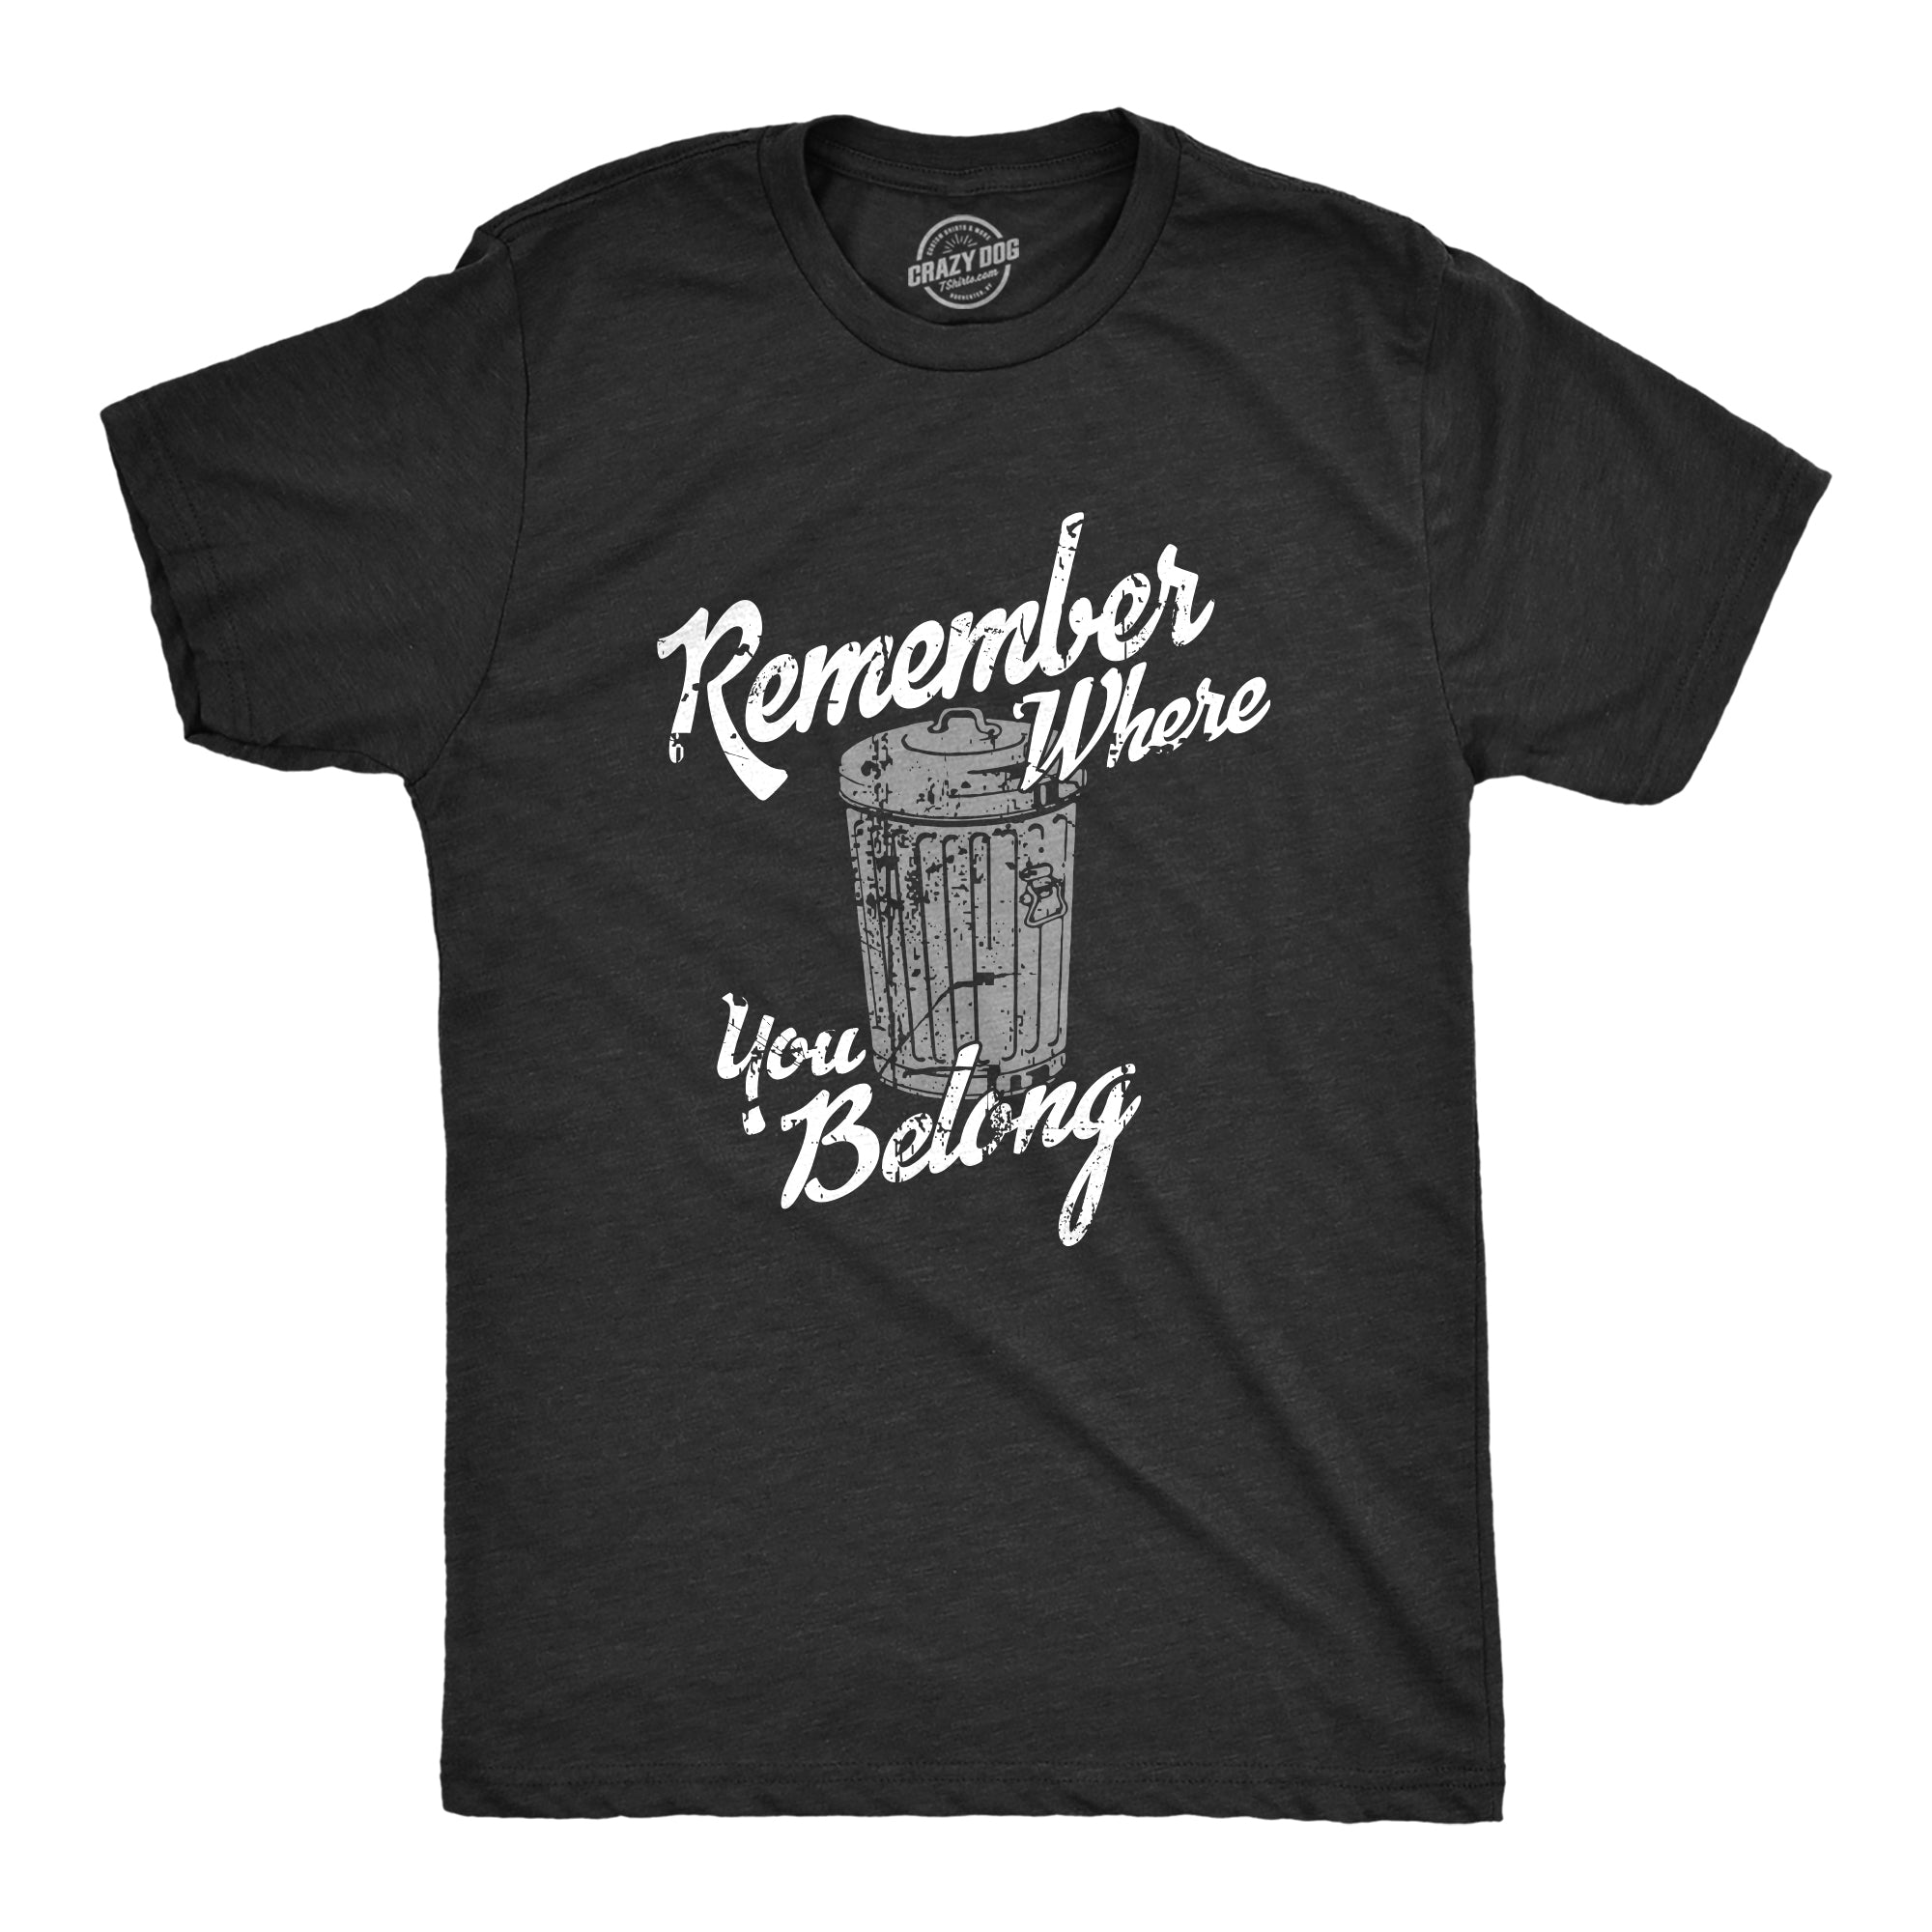 Funny Heather Black - REMEMBER Remember Where You Belong Mens T Shirt Nerdy Sarcastic Tee